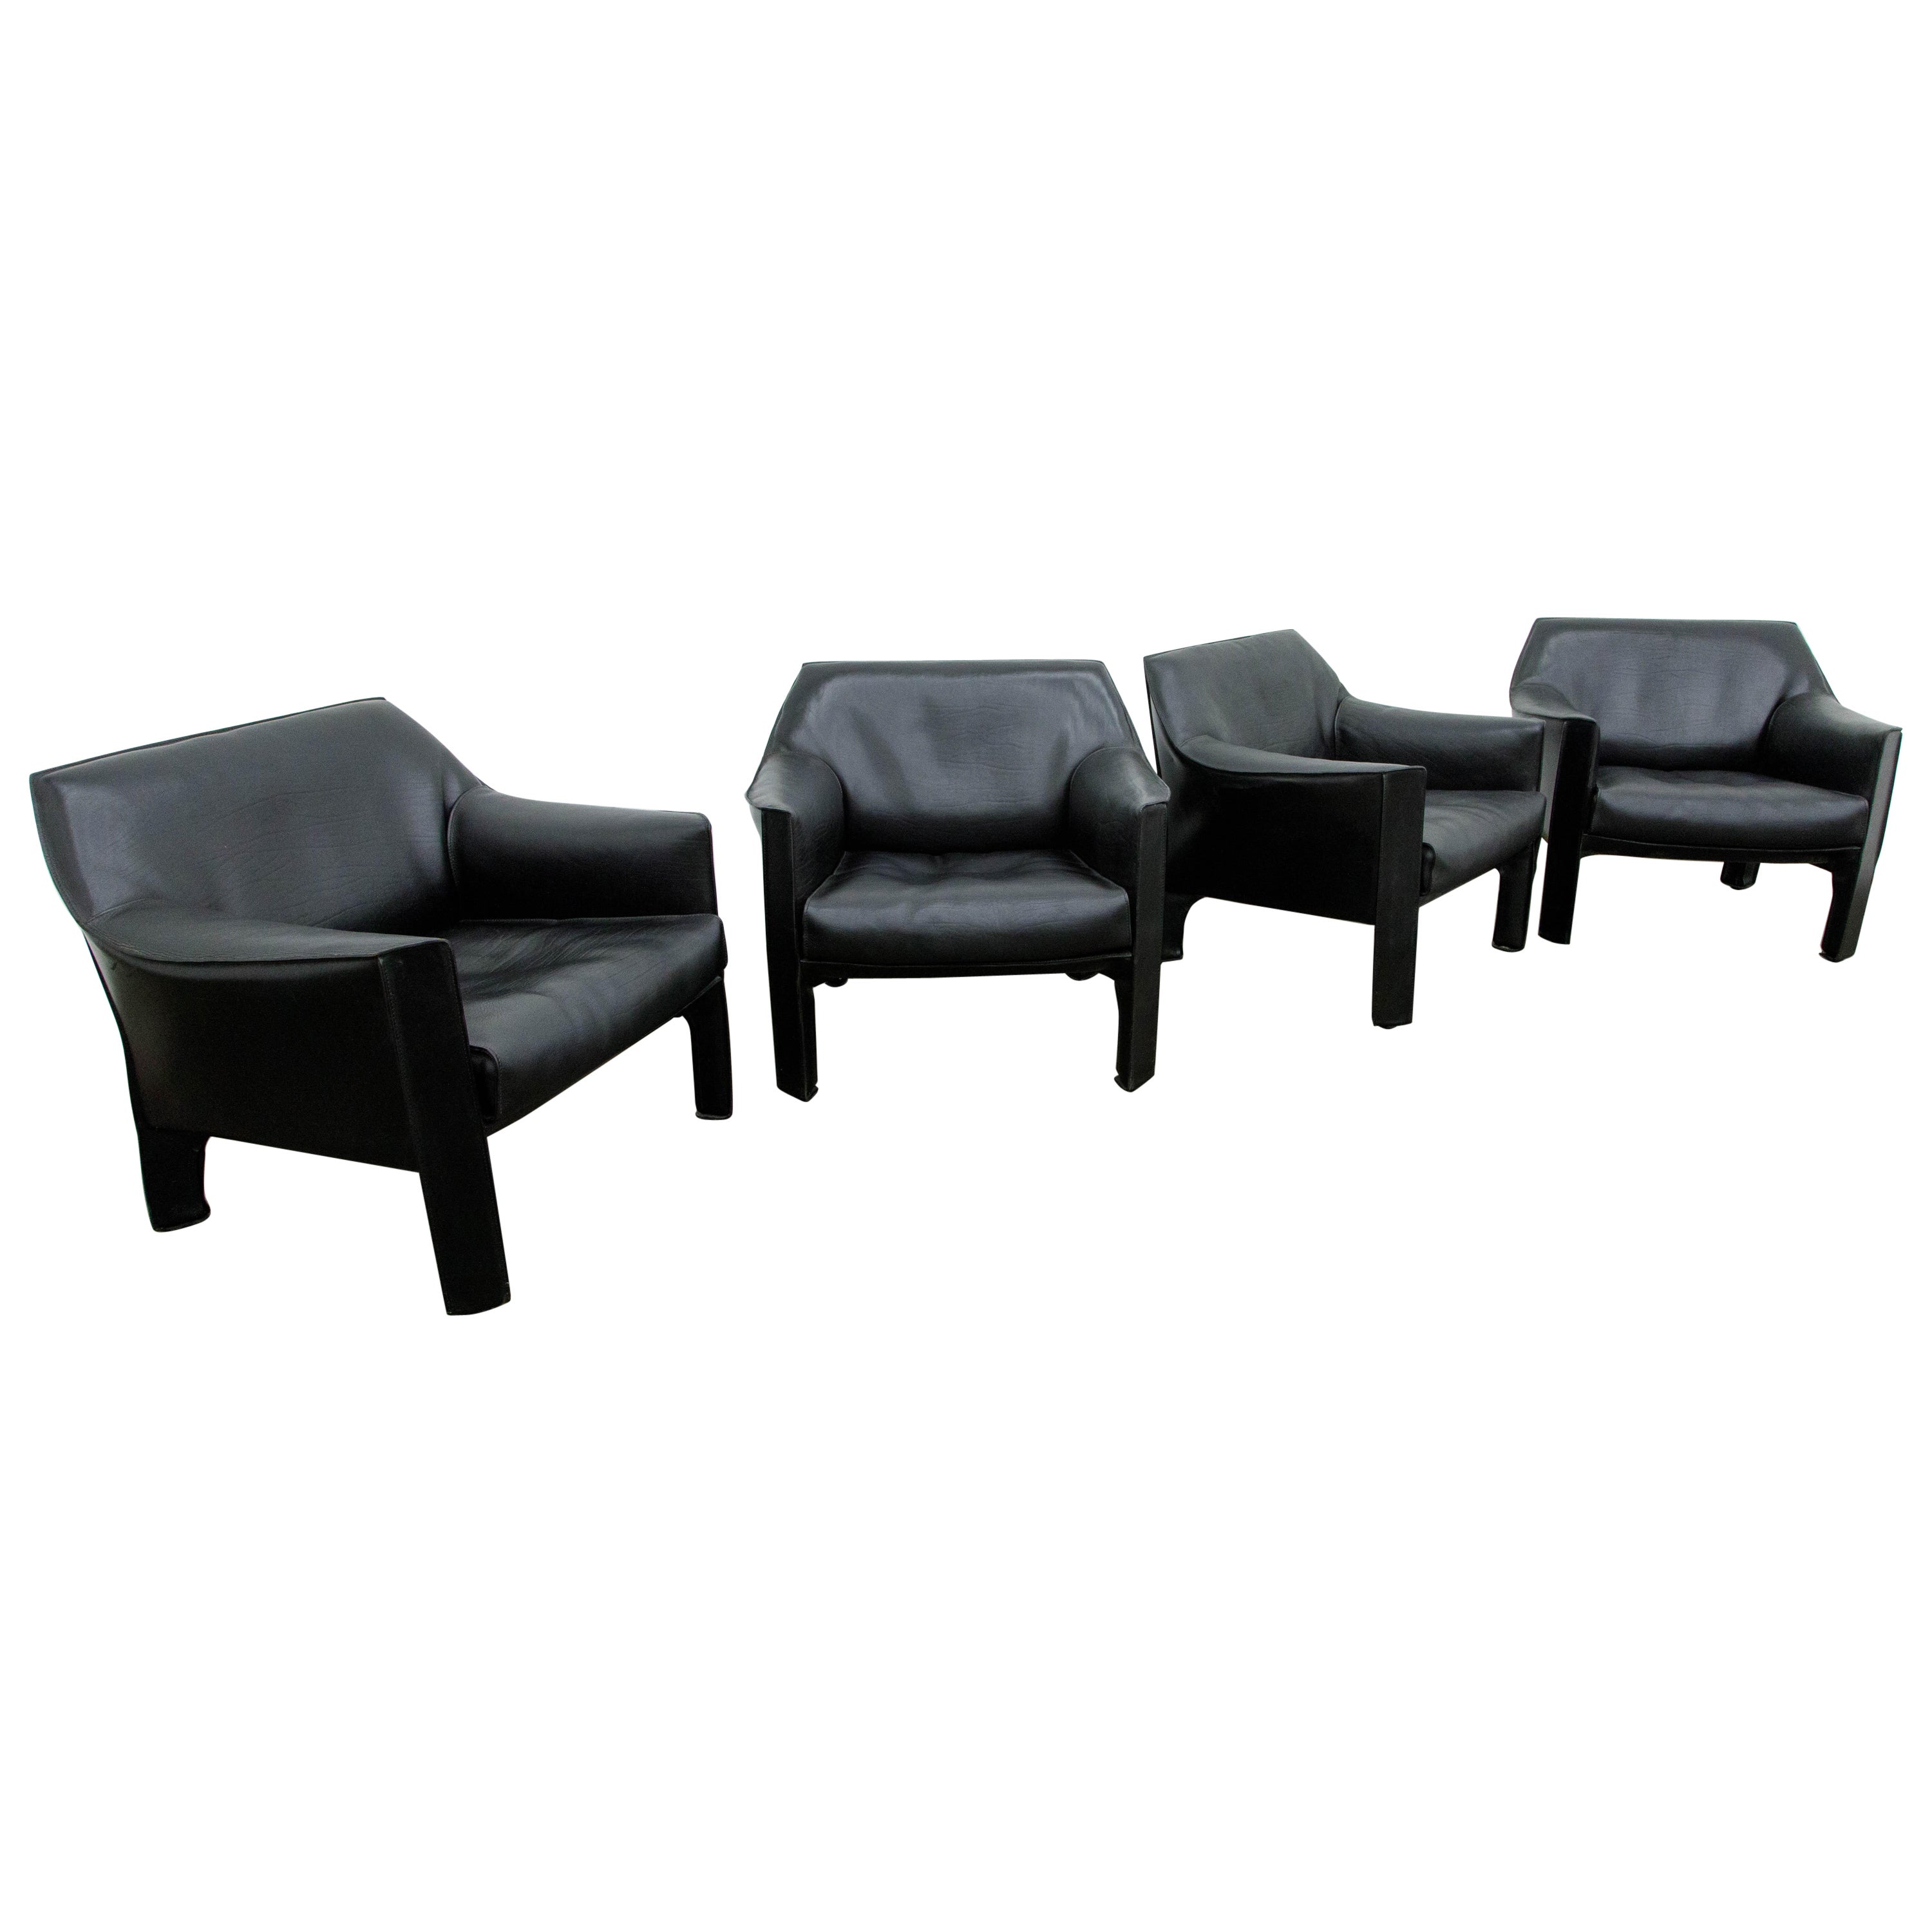 Mario Bellini for Cassina 'Cab #415' Buffalo Leather Club Chairs, Signed, 1980s